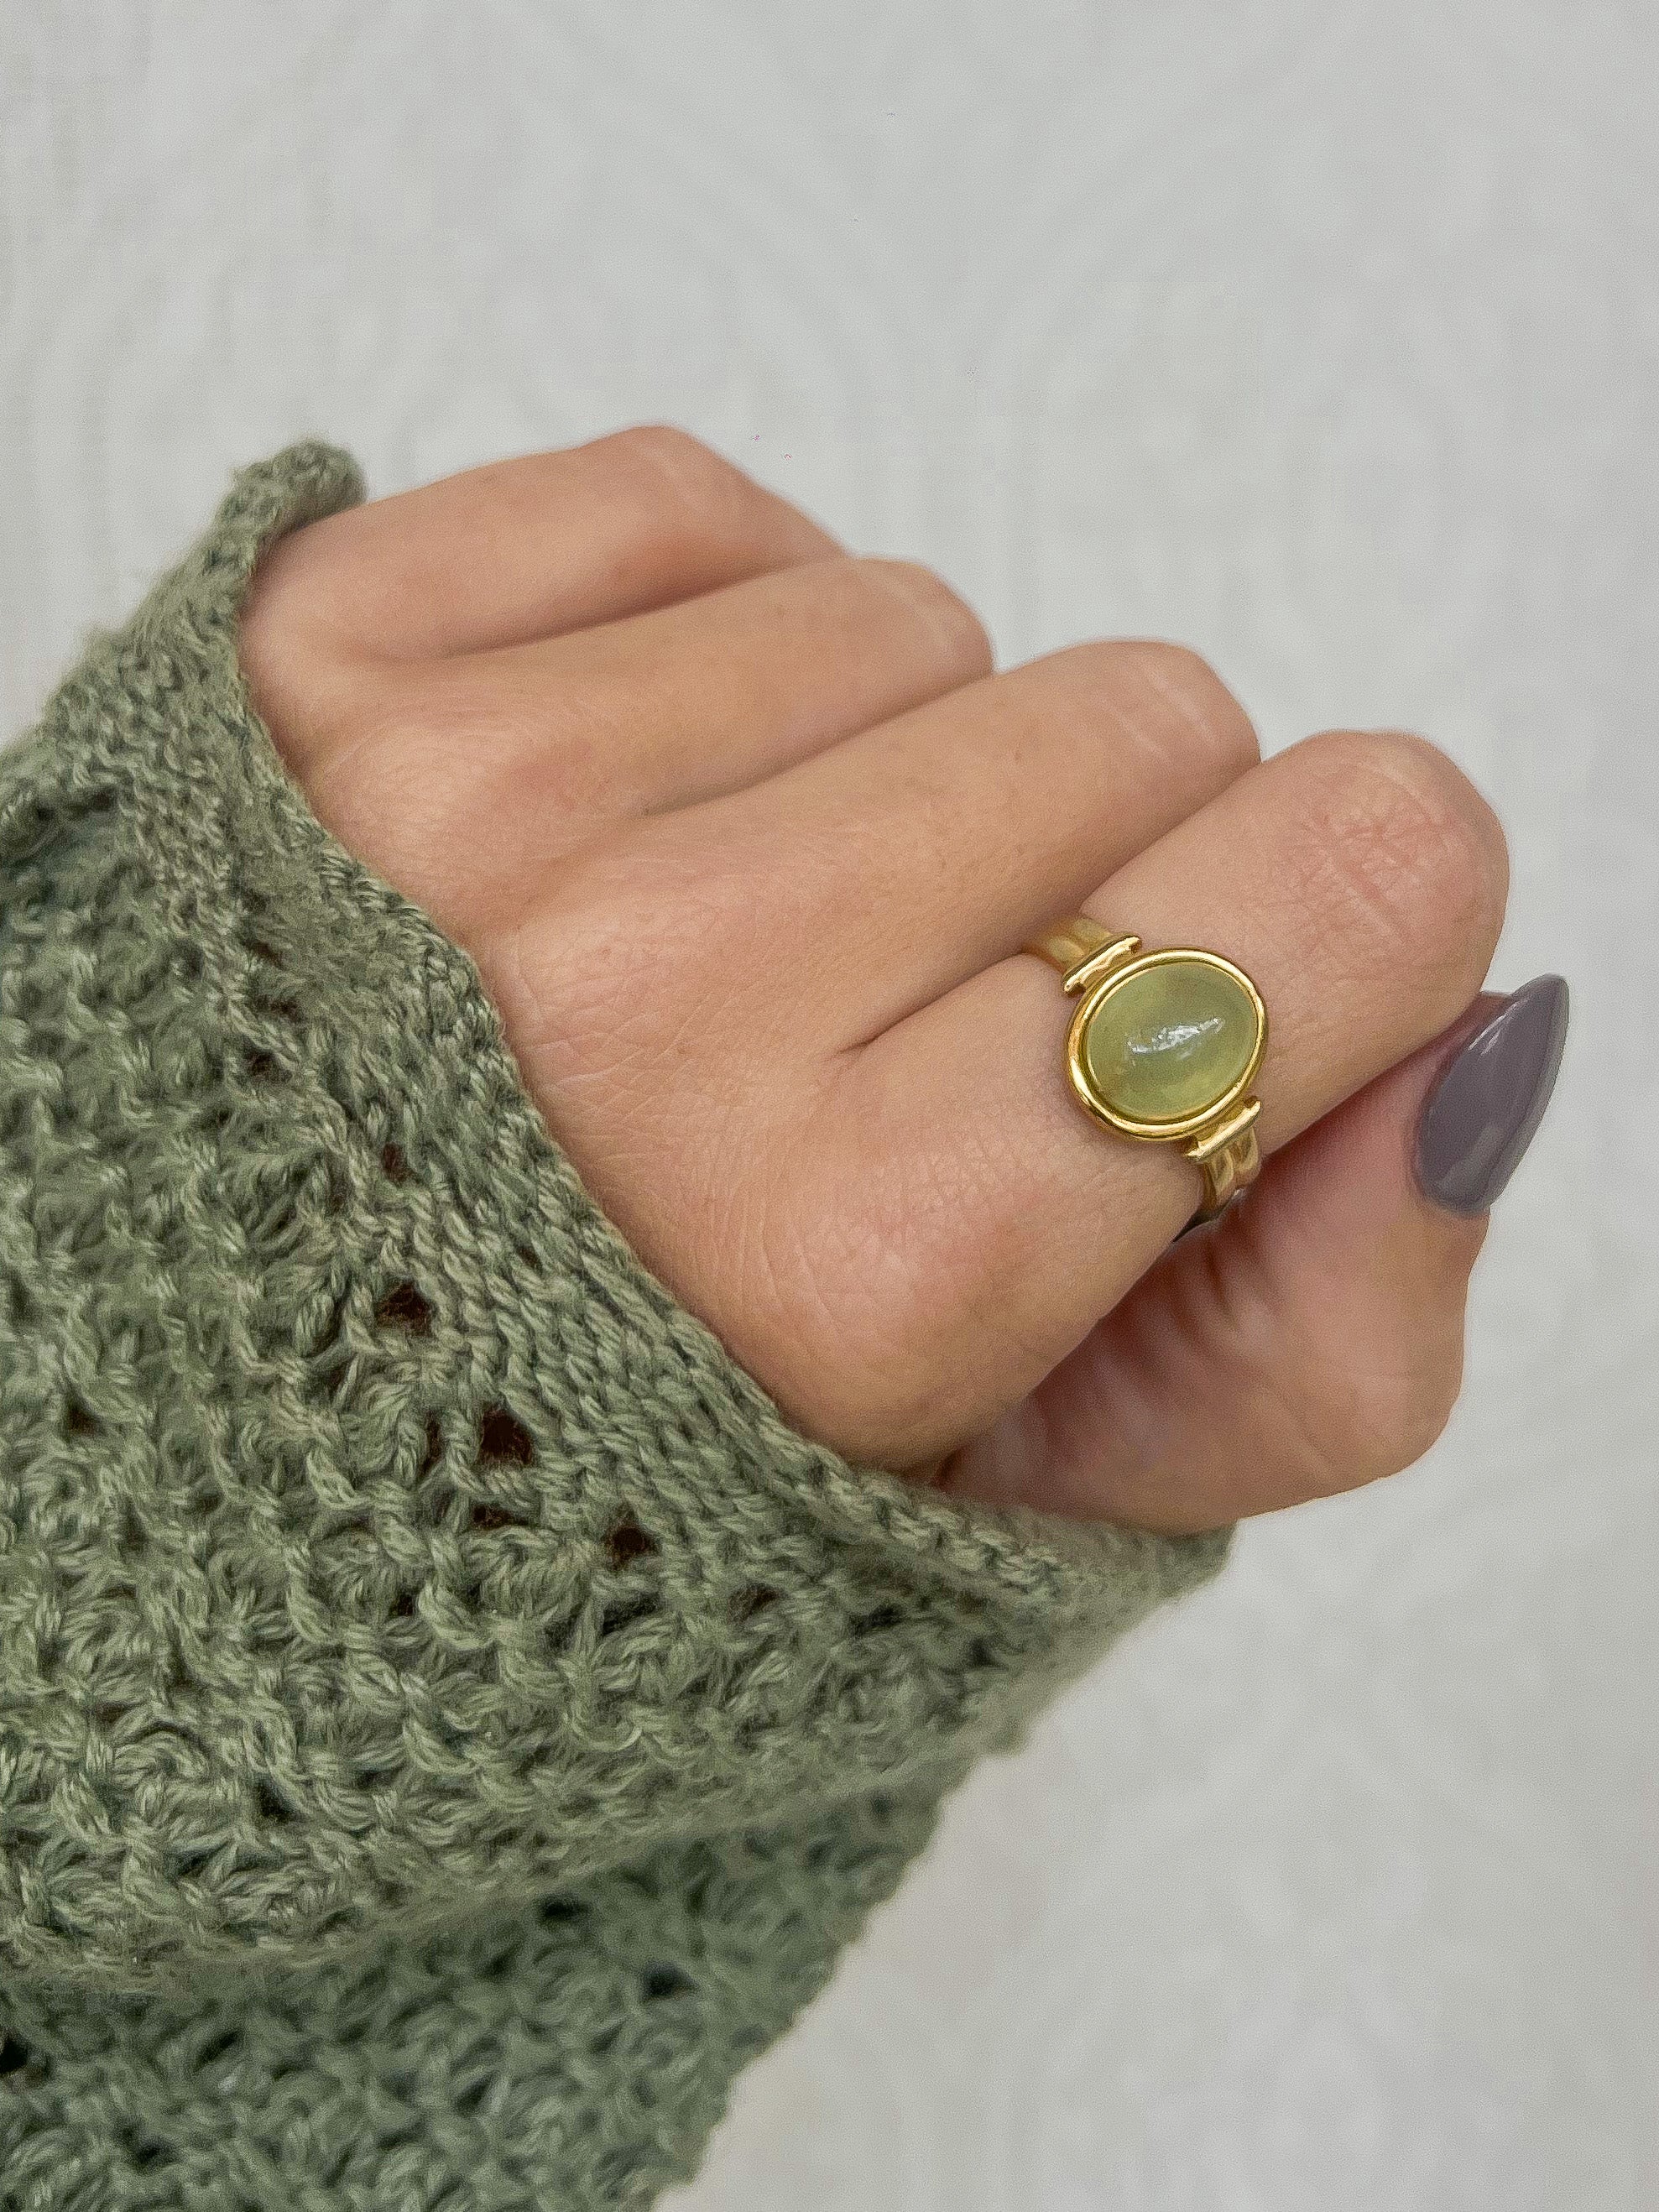 Lush Green Ring - For the Girls Jewelry